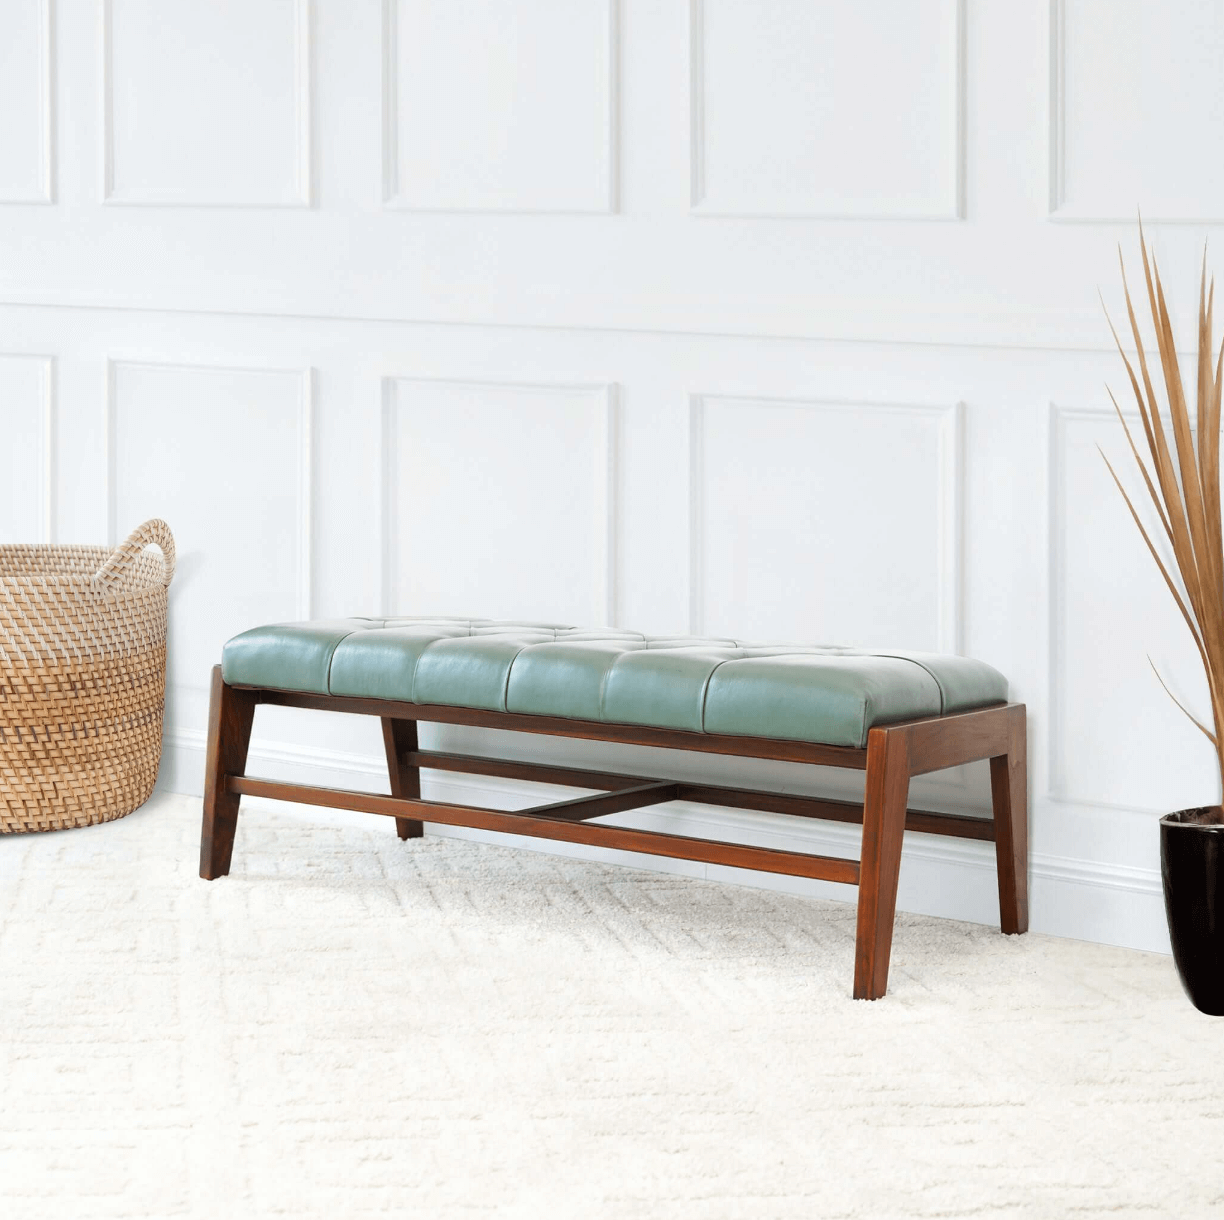 Hera Solid Wood Bench Button Tufted Green Leather Upholstery 49" - Revel Sofa 